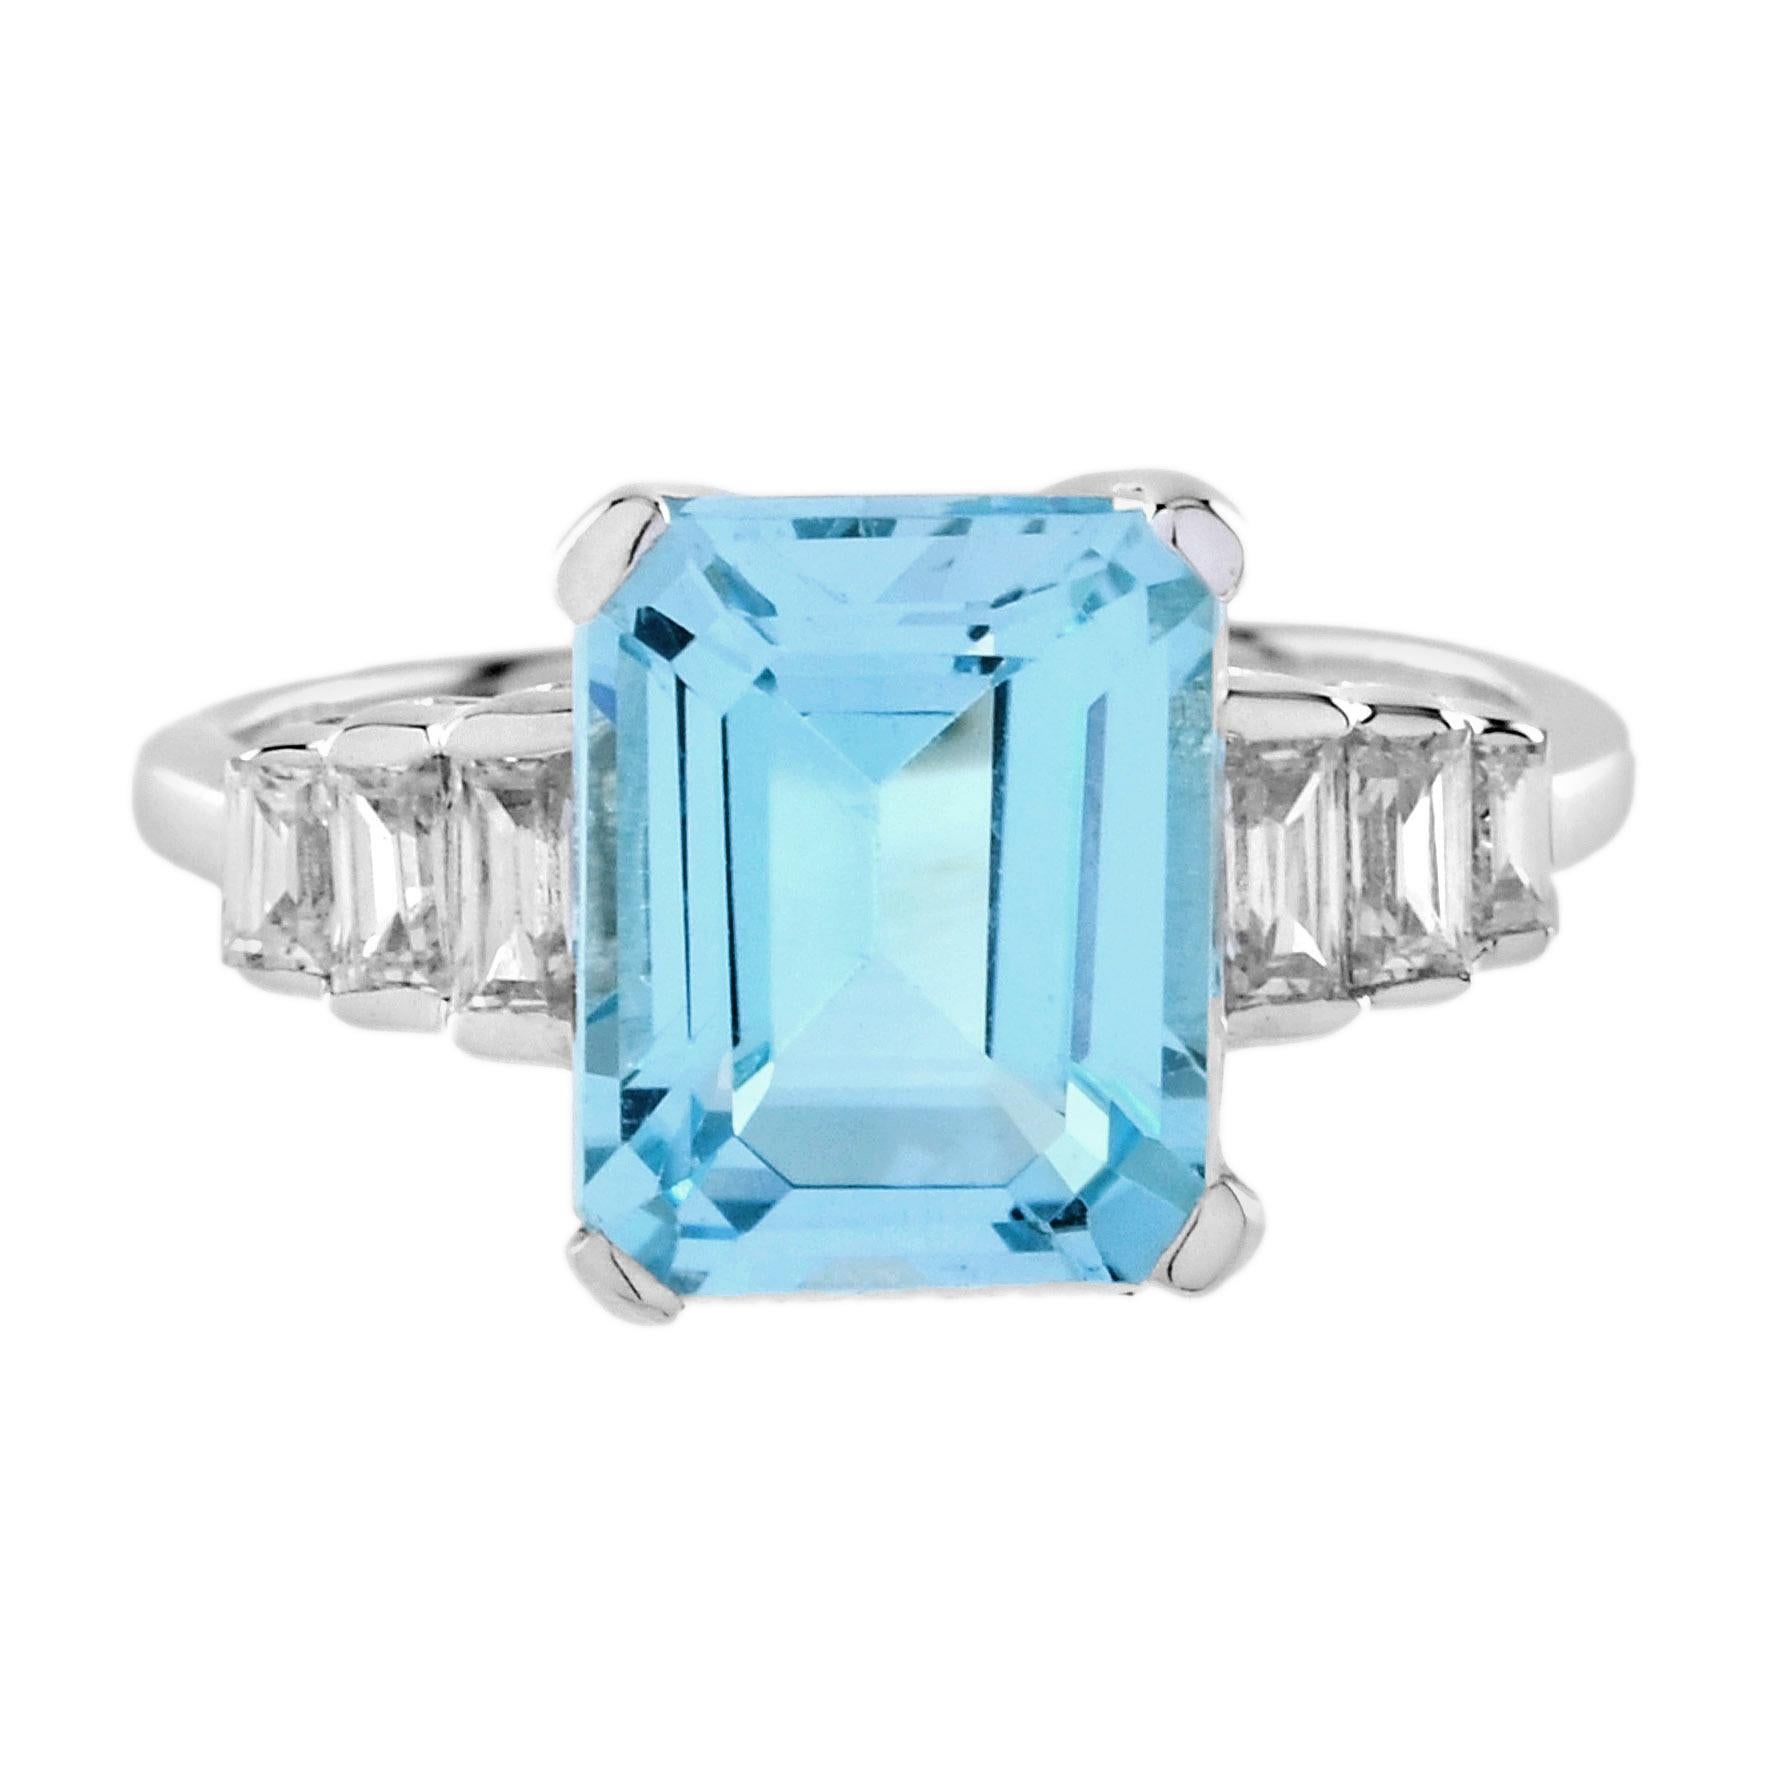 Aquamarine and Baguette Diamond Engagement Ring in 18K White Gold